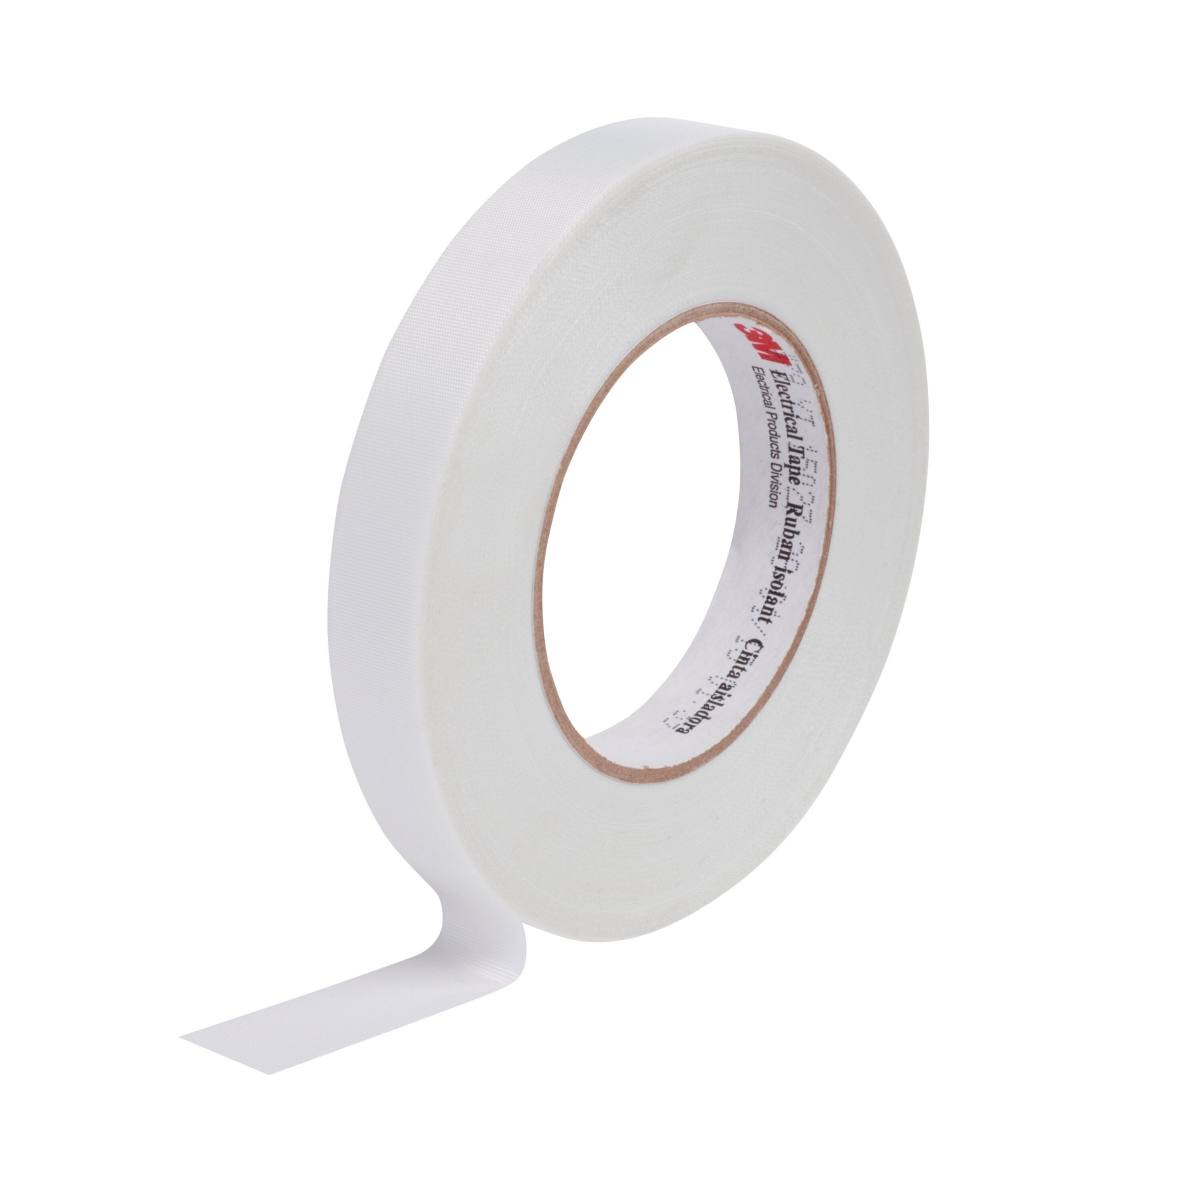 3M ET 79 Glasweefselband, wit, 19 mm x 55 m x 0,18 mm